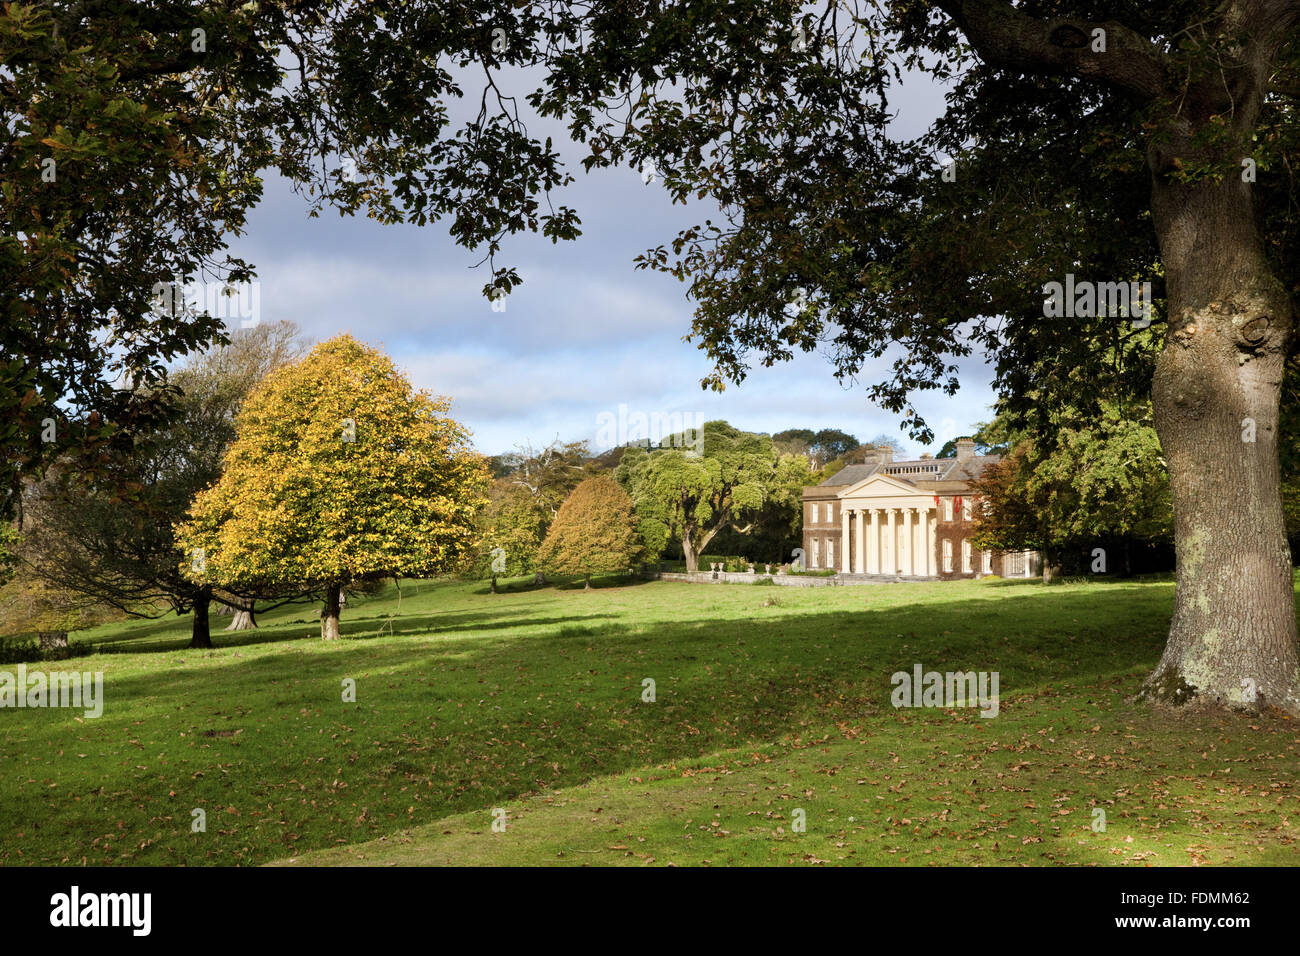 The house from the Tennis Lawn at Trelissick Garden, Cornwall. Stock Photo